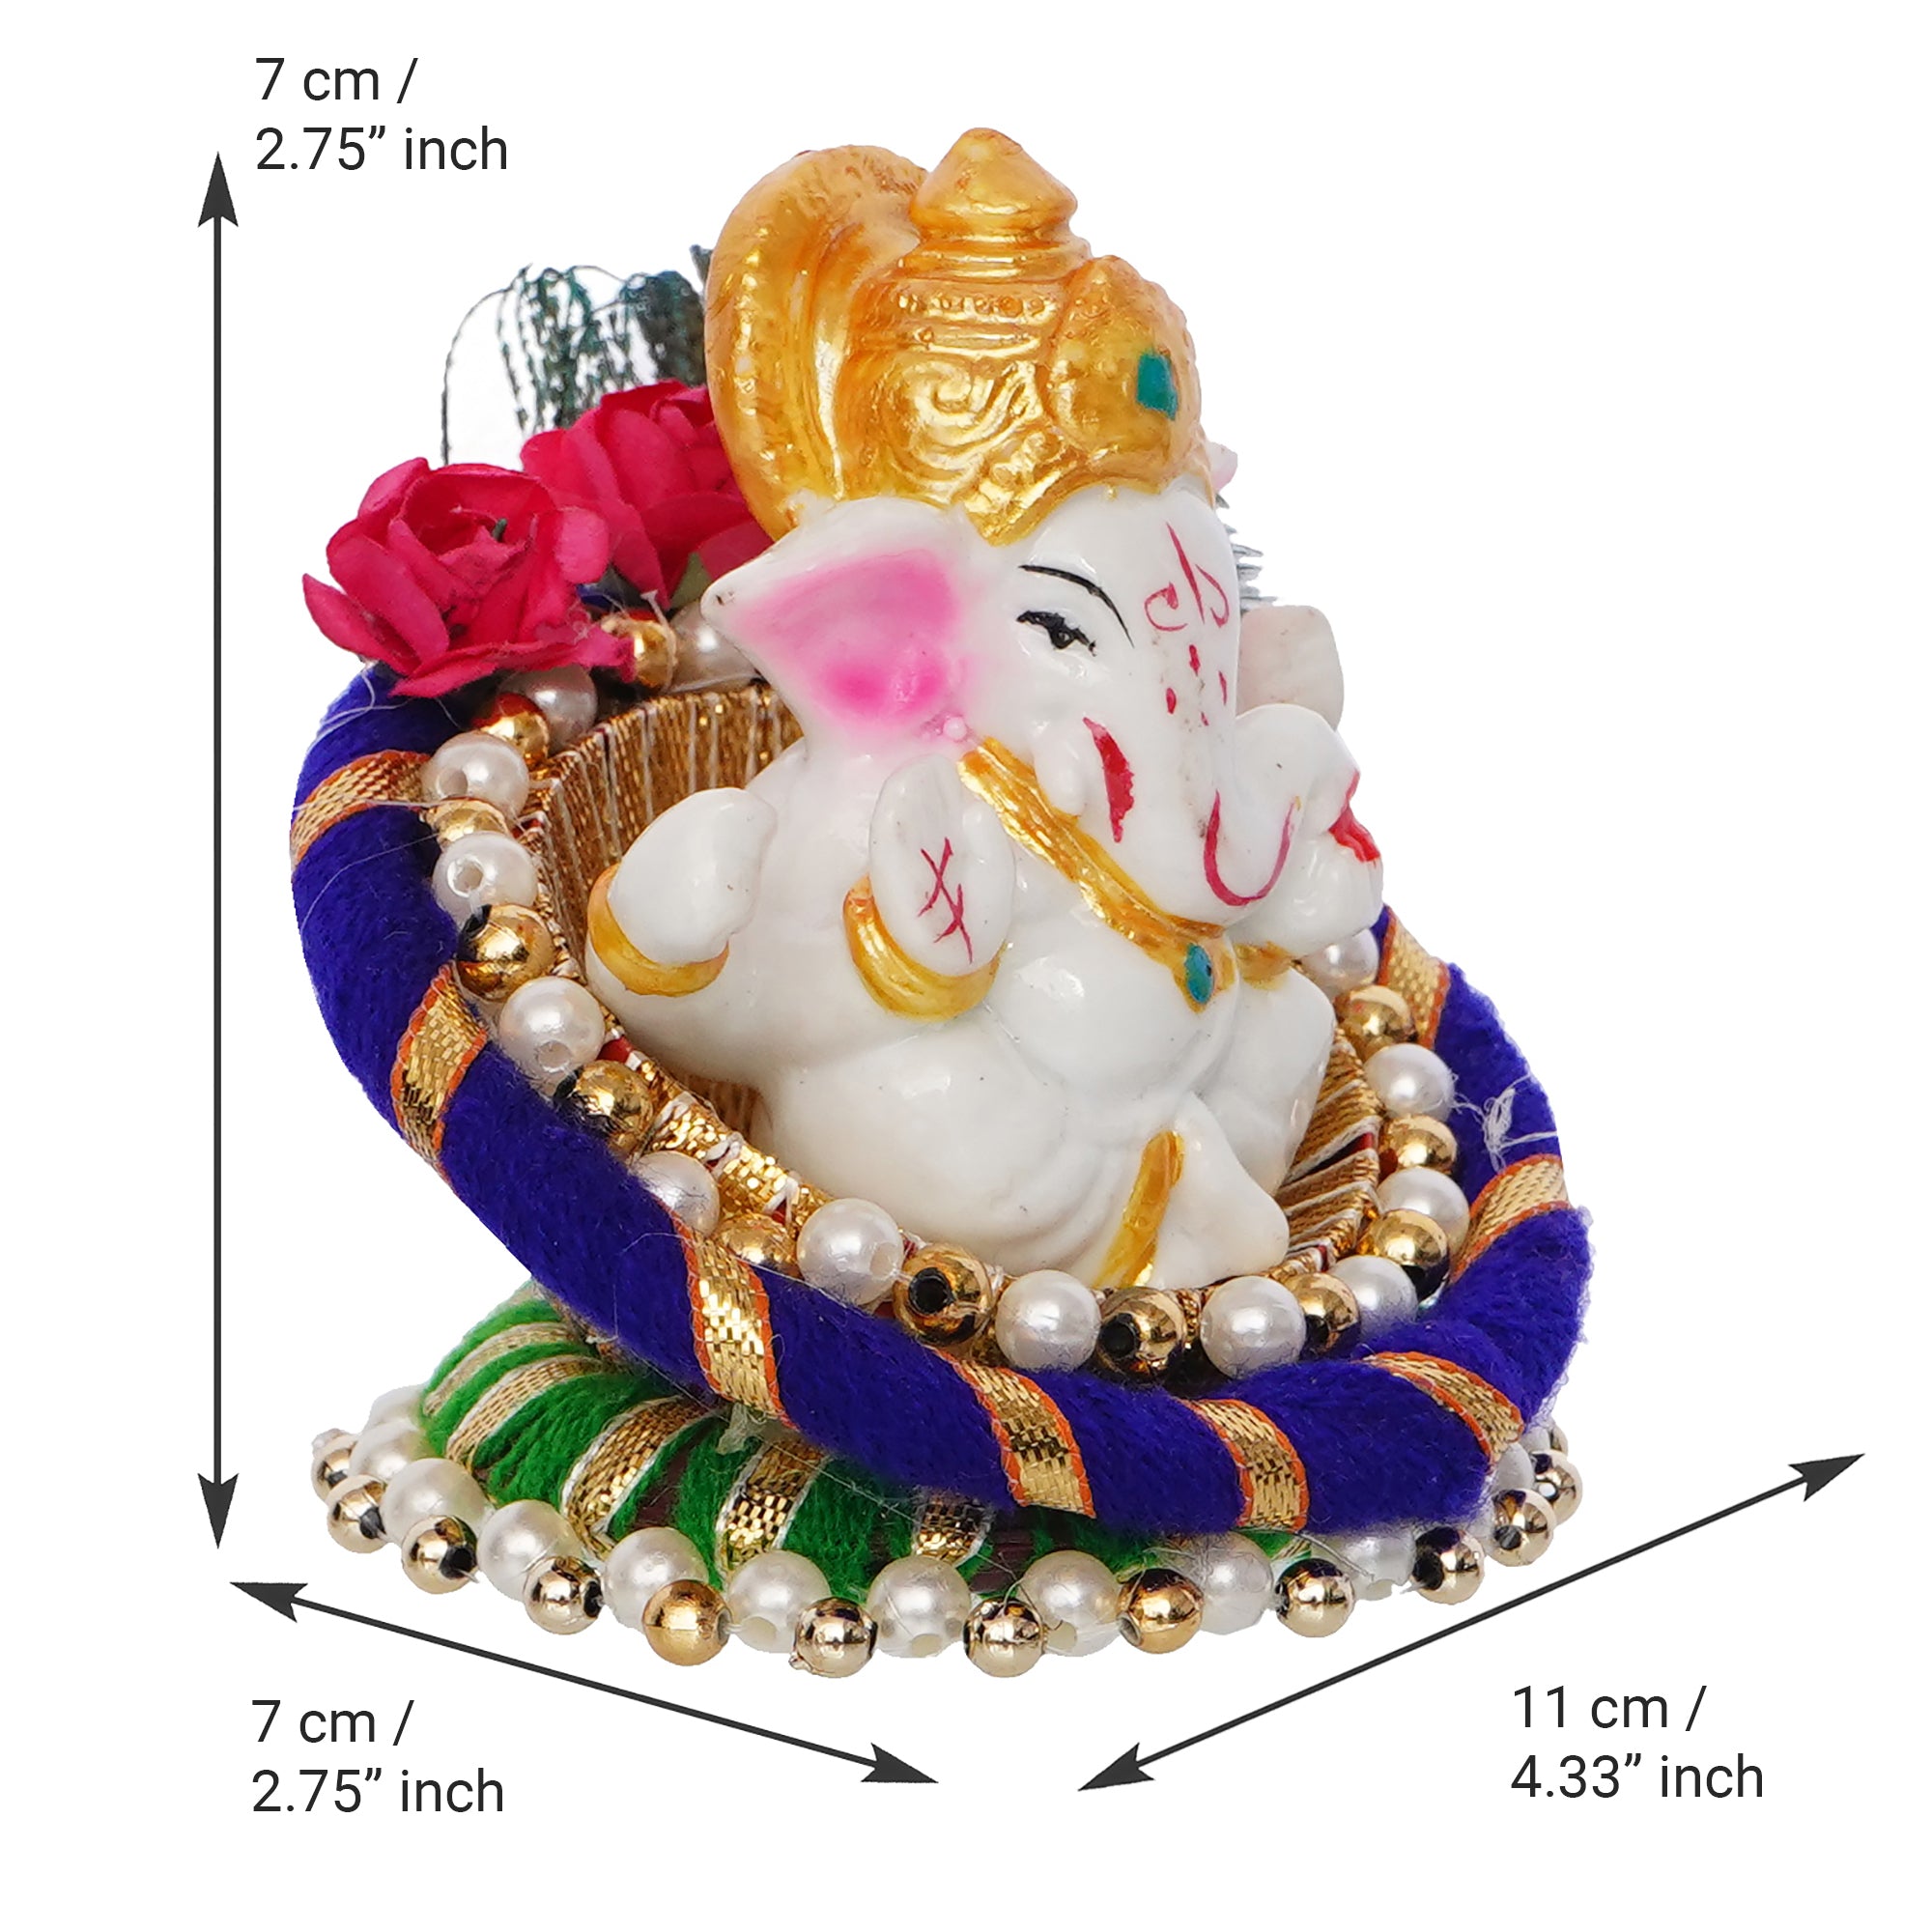 Polyresin Lord Ganesha Idol on Decorative Handcrafted Floral Plate for Home, Office and Car Dashboard 3